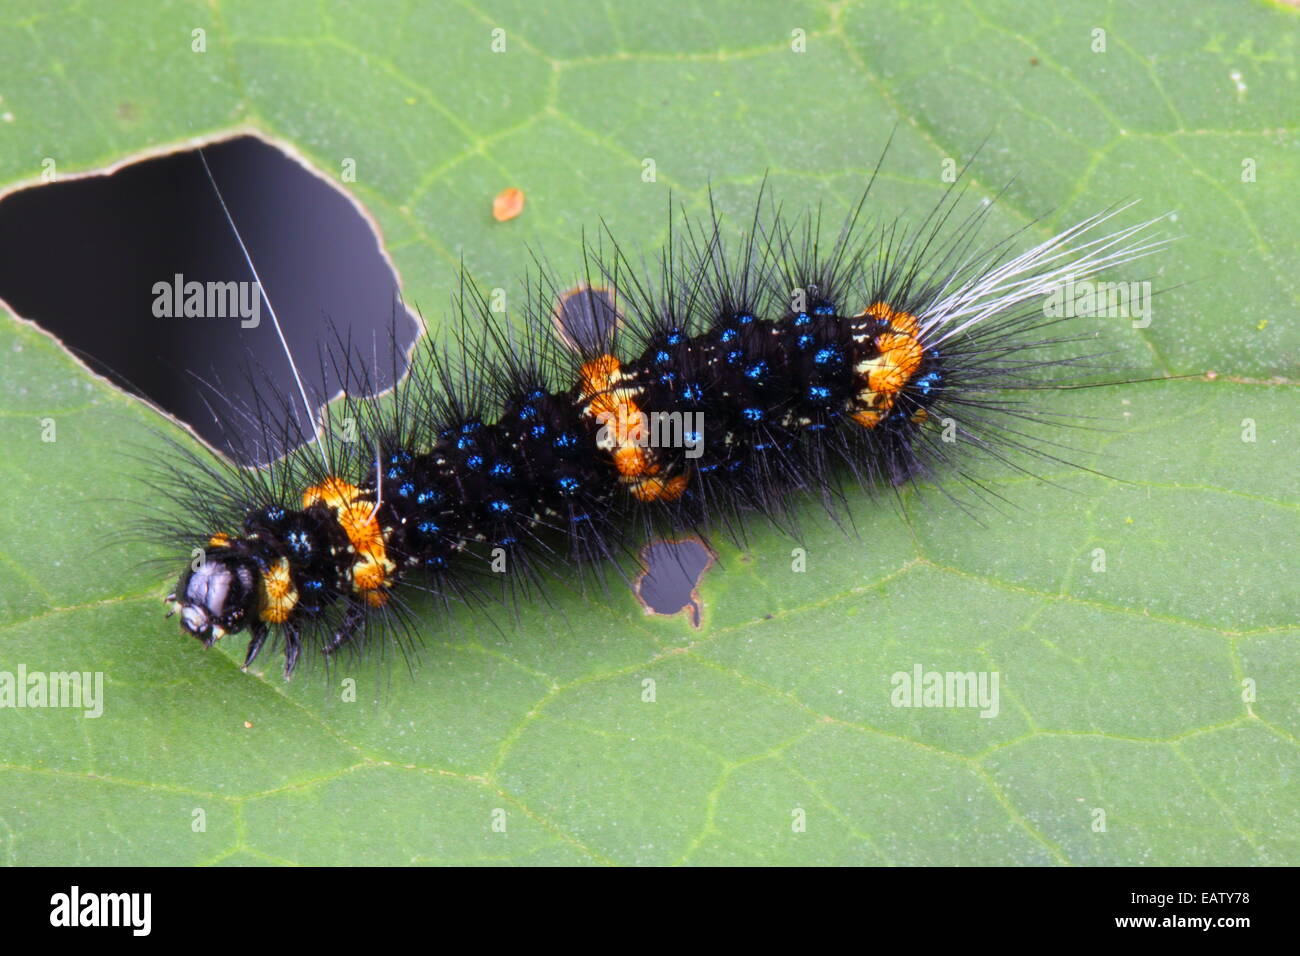 A fuzzy gold and blue-banded caterpillar crawling on a leaf. Stock Photo